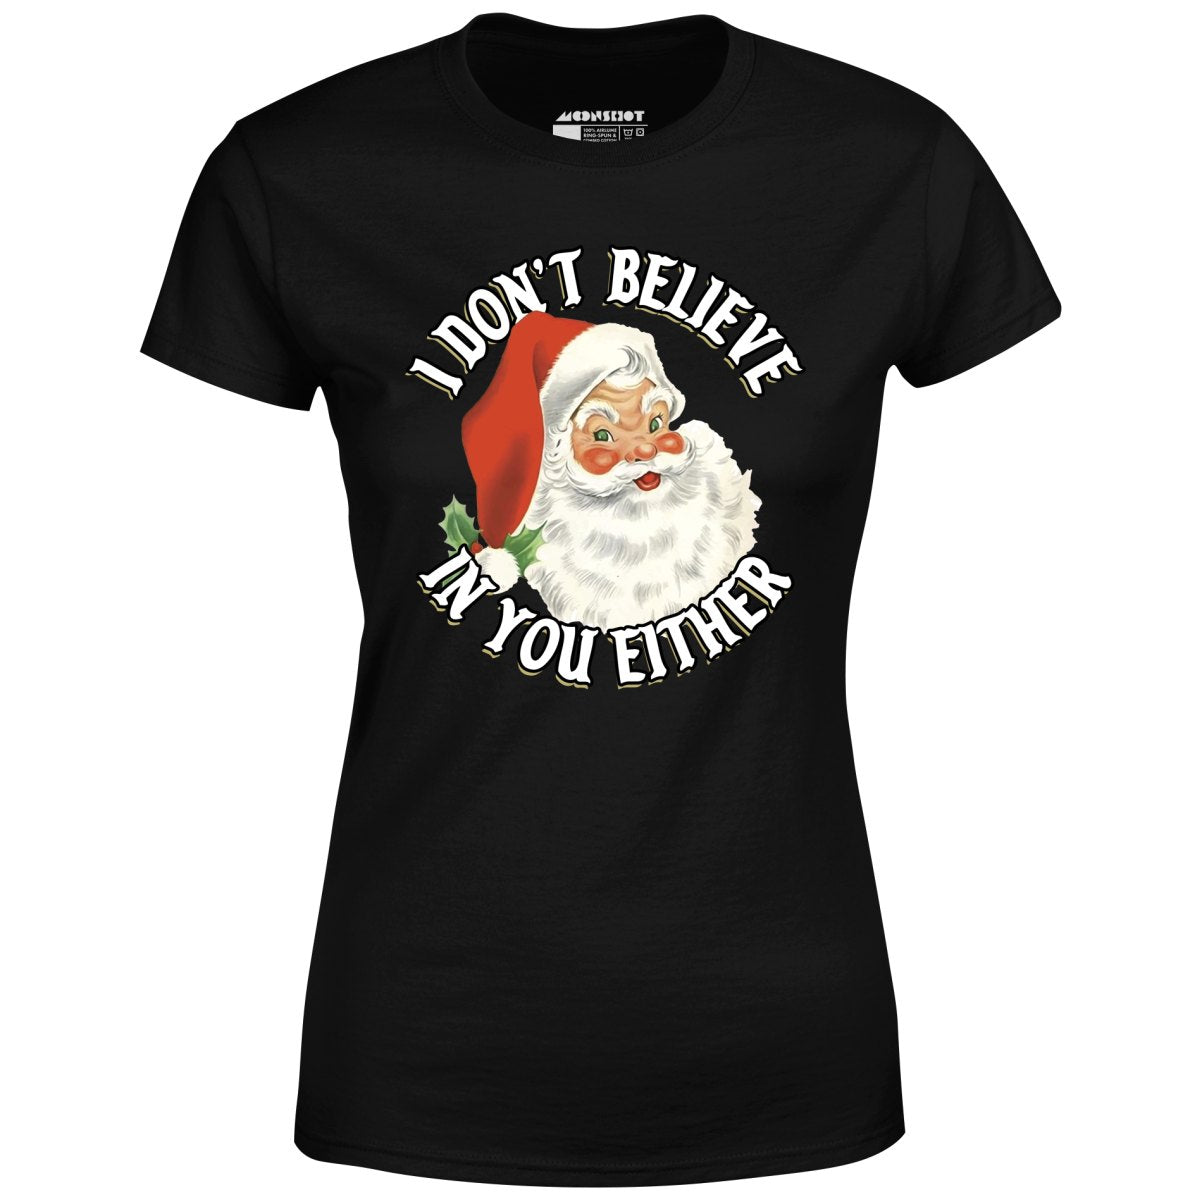 I Don't Believe in You Either - Women's T-Shirt